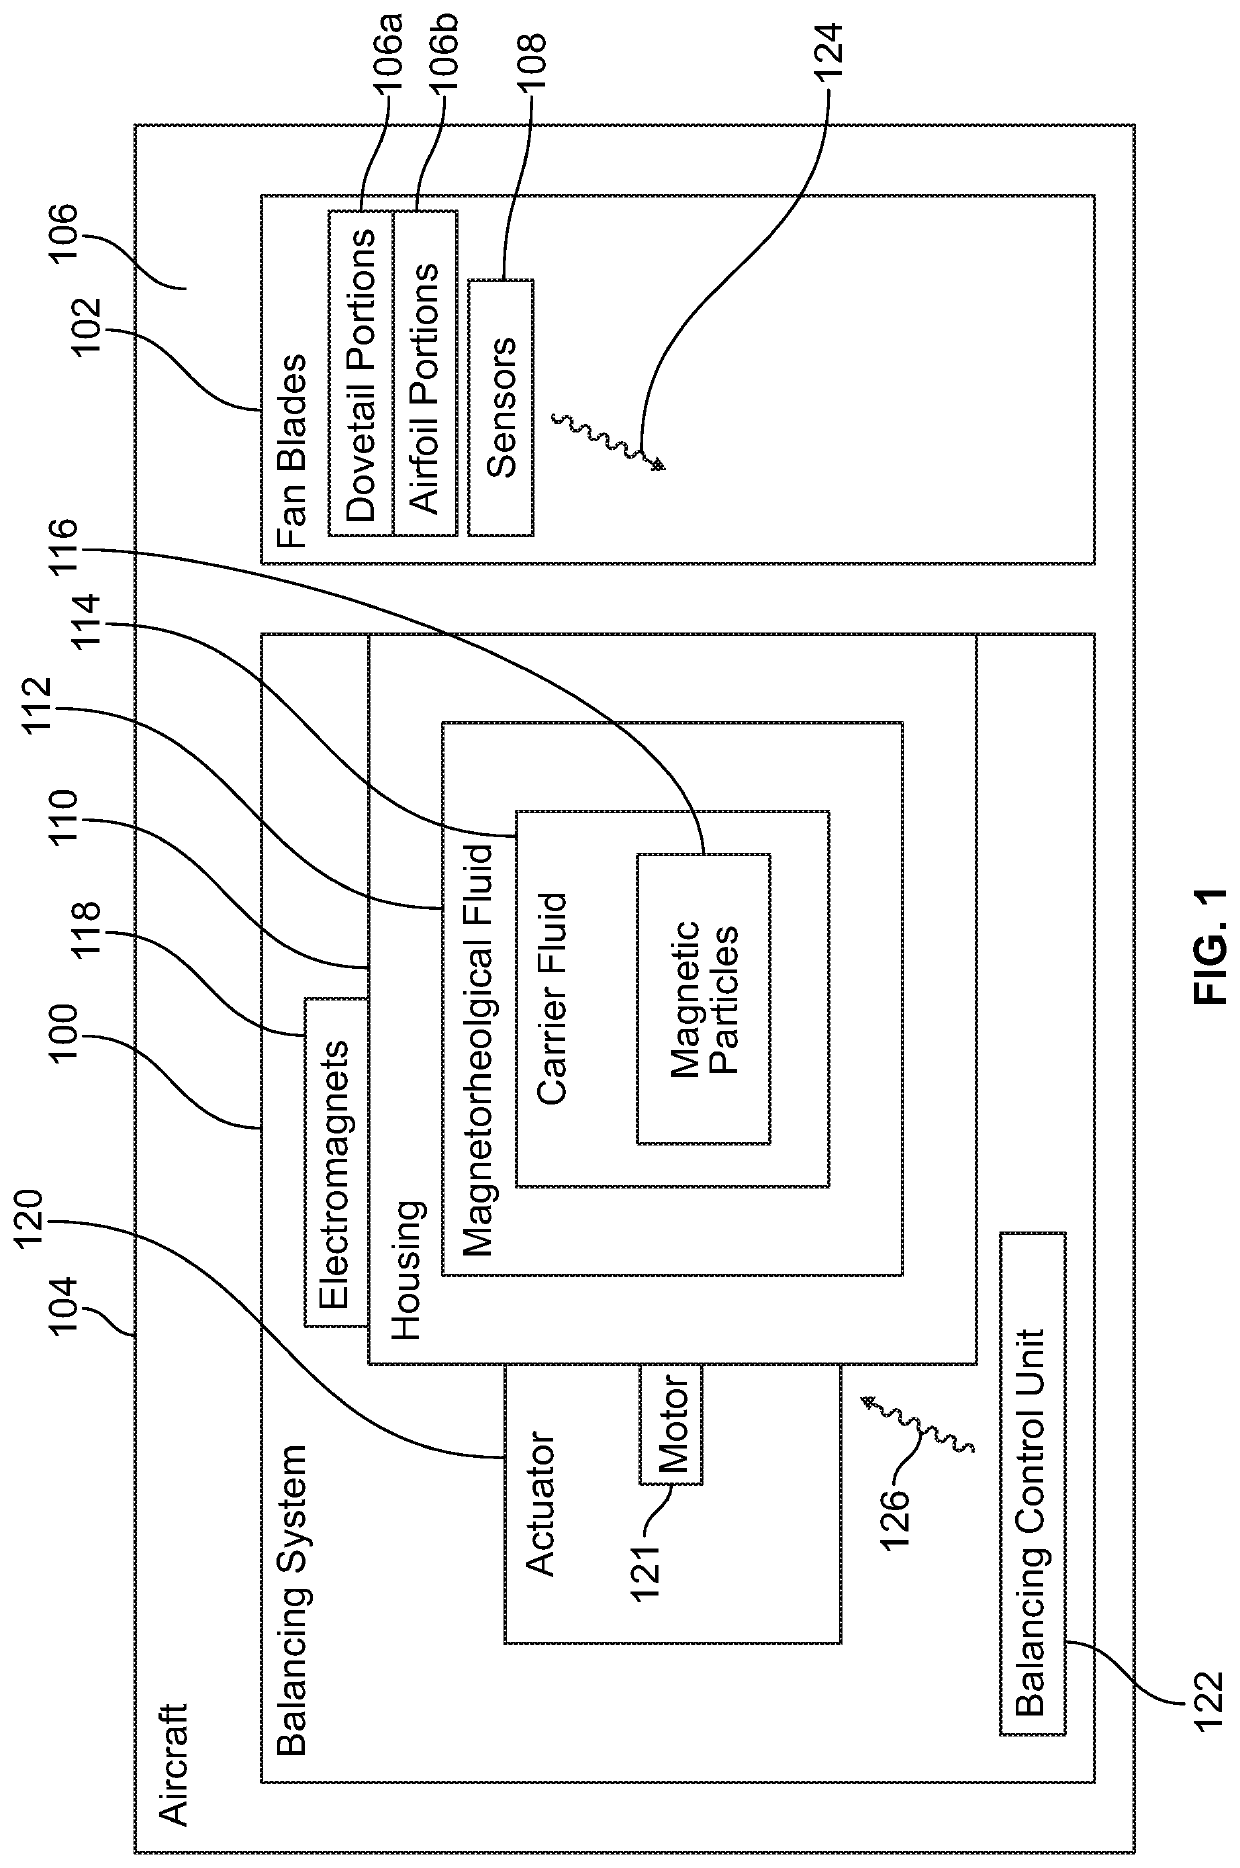 Balancing systems and methods for an engine of an aircraft